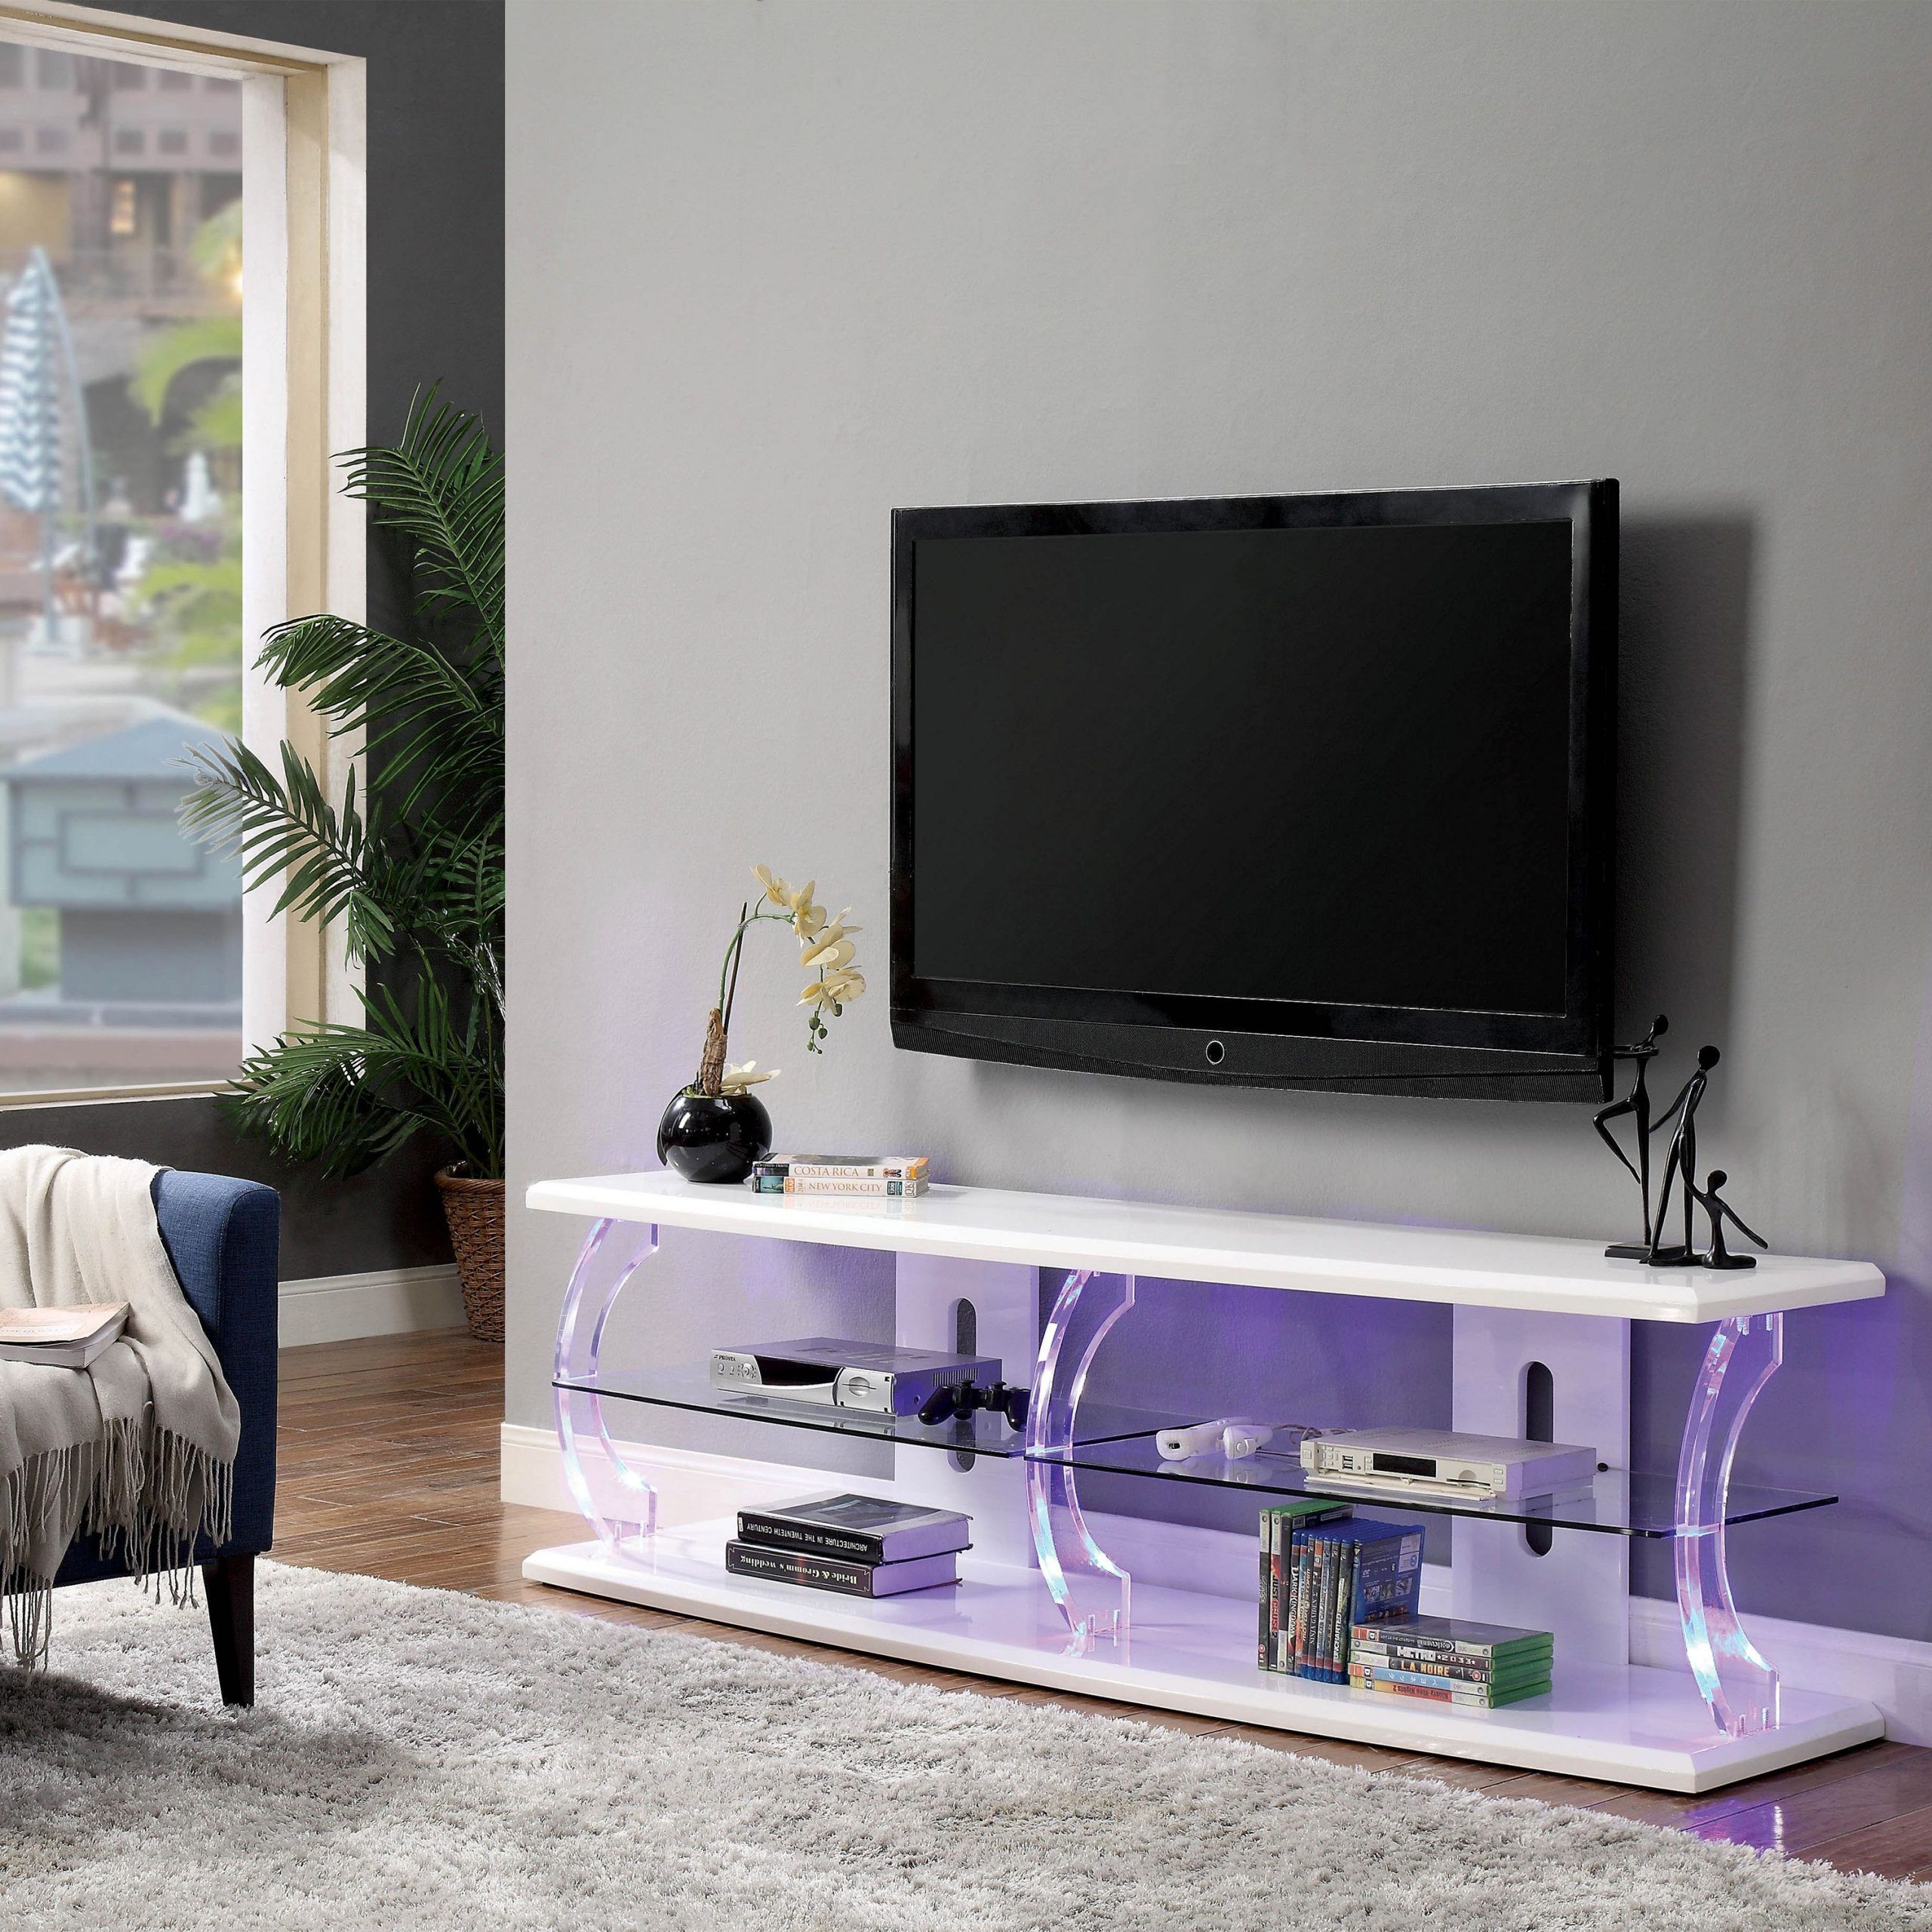 Furniture Of America Daley Modern White 60 Inch Led Tv Inside White Tv Stand Modern (View 4 of 15)